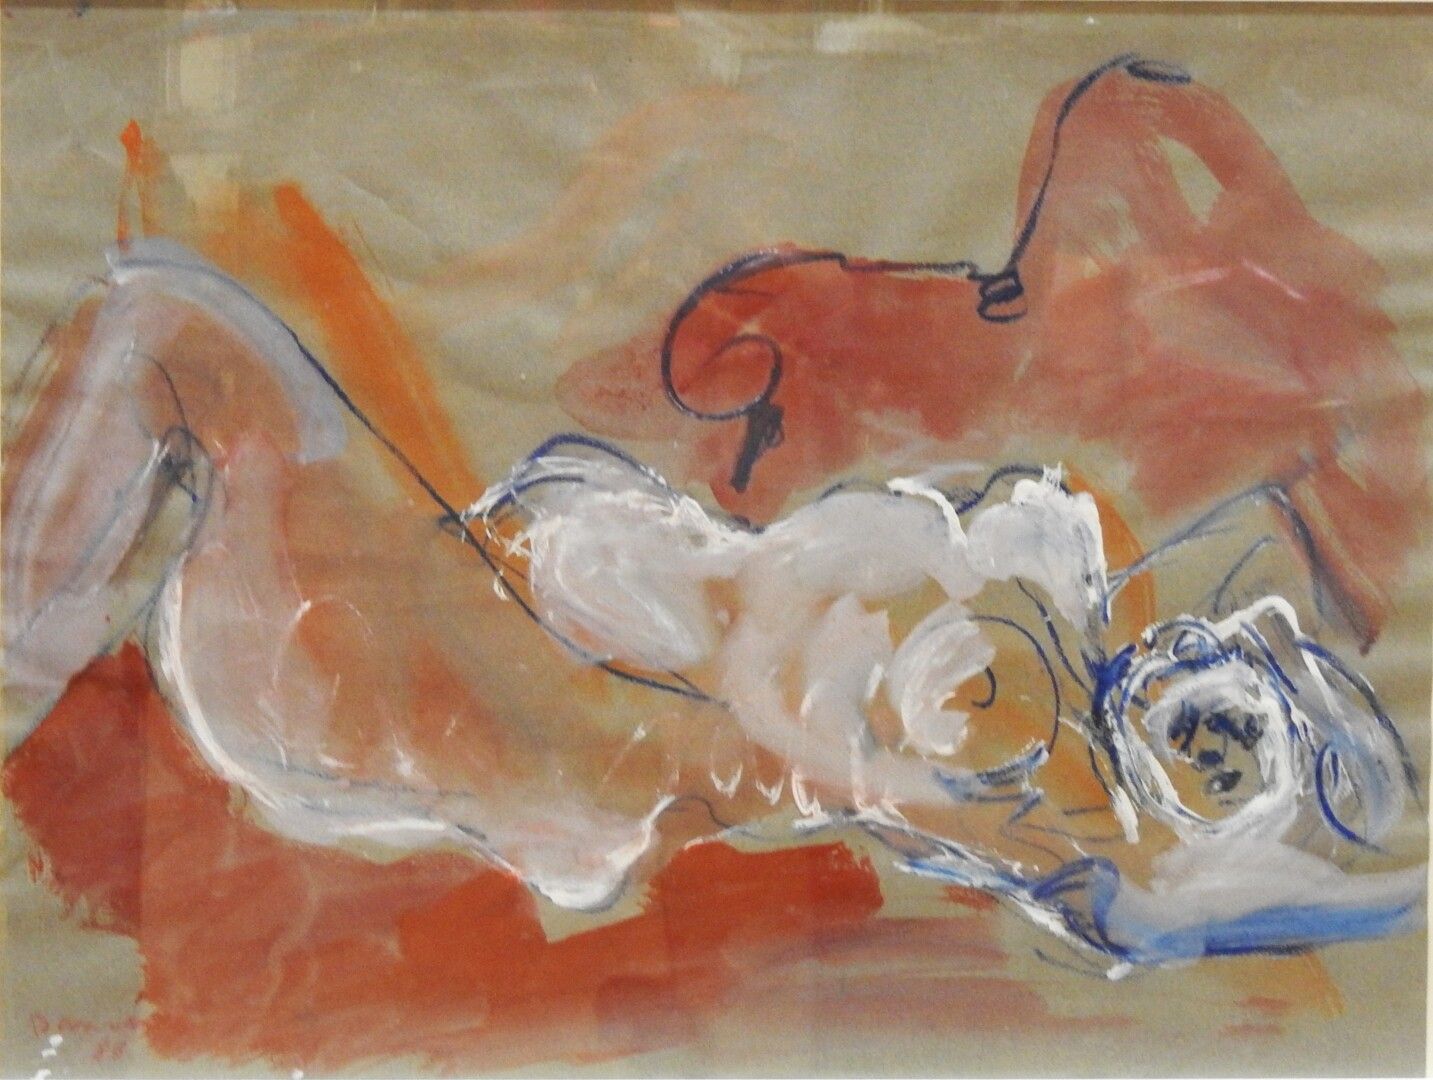 Null Bernard DAMIANO (1926 - 2000)

Reclining woman

Watercolor, and white gouac&hellip;